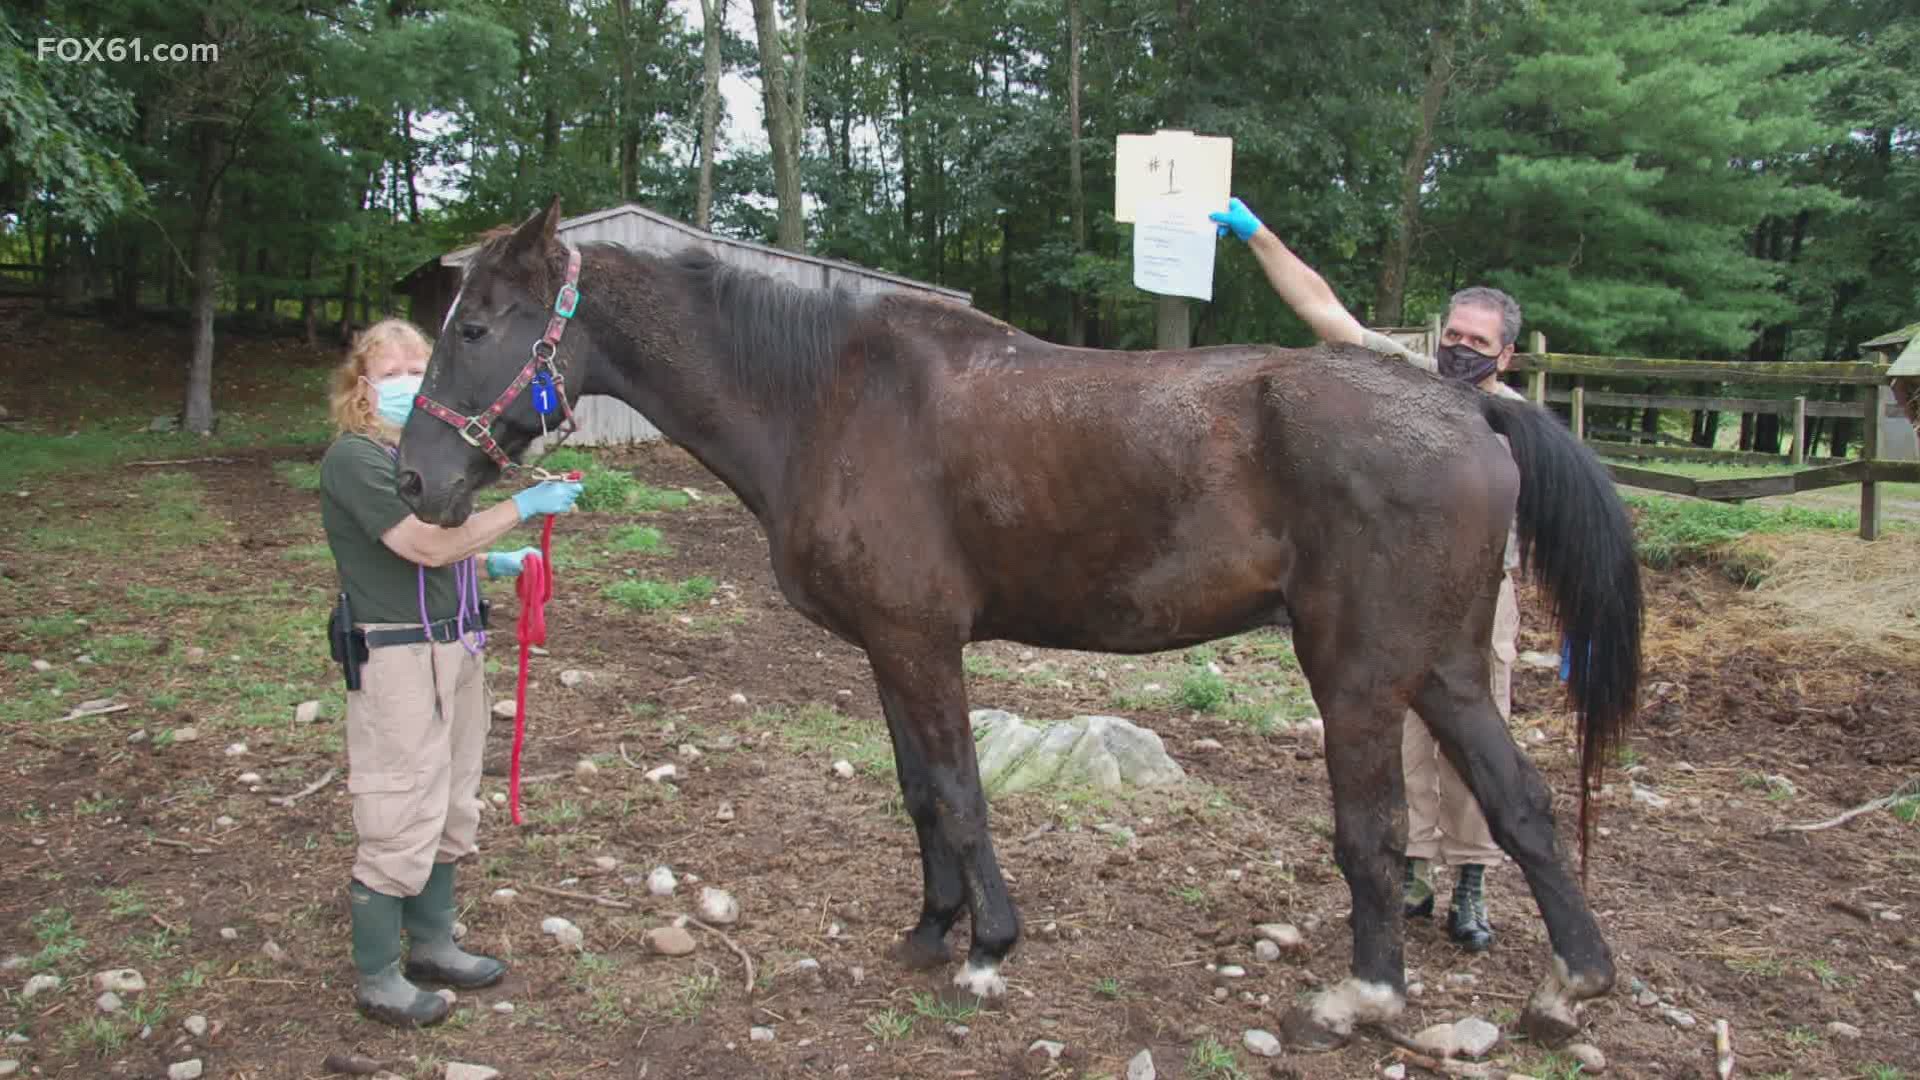 Connecticut's Attorney General is now calling for the state to take full custody of 8 horses that were found extremely malnourished in September of 2020.